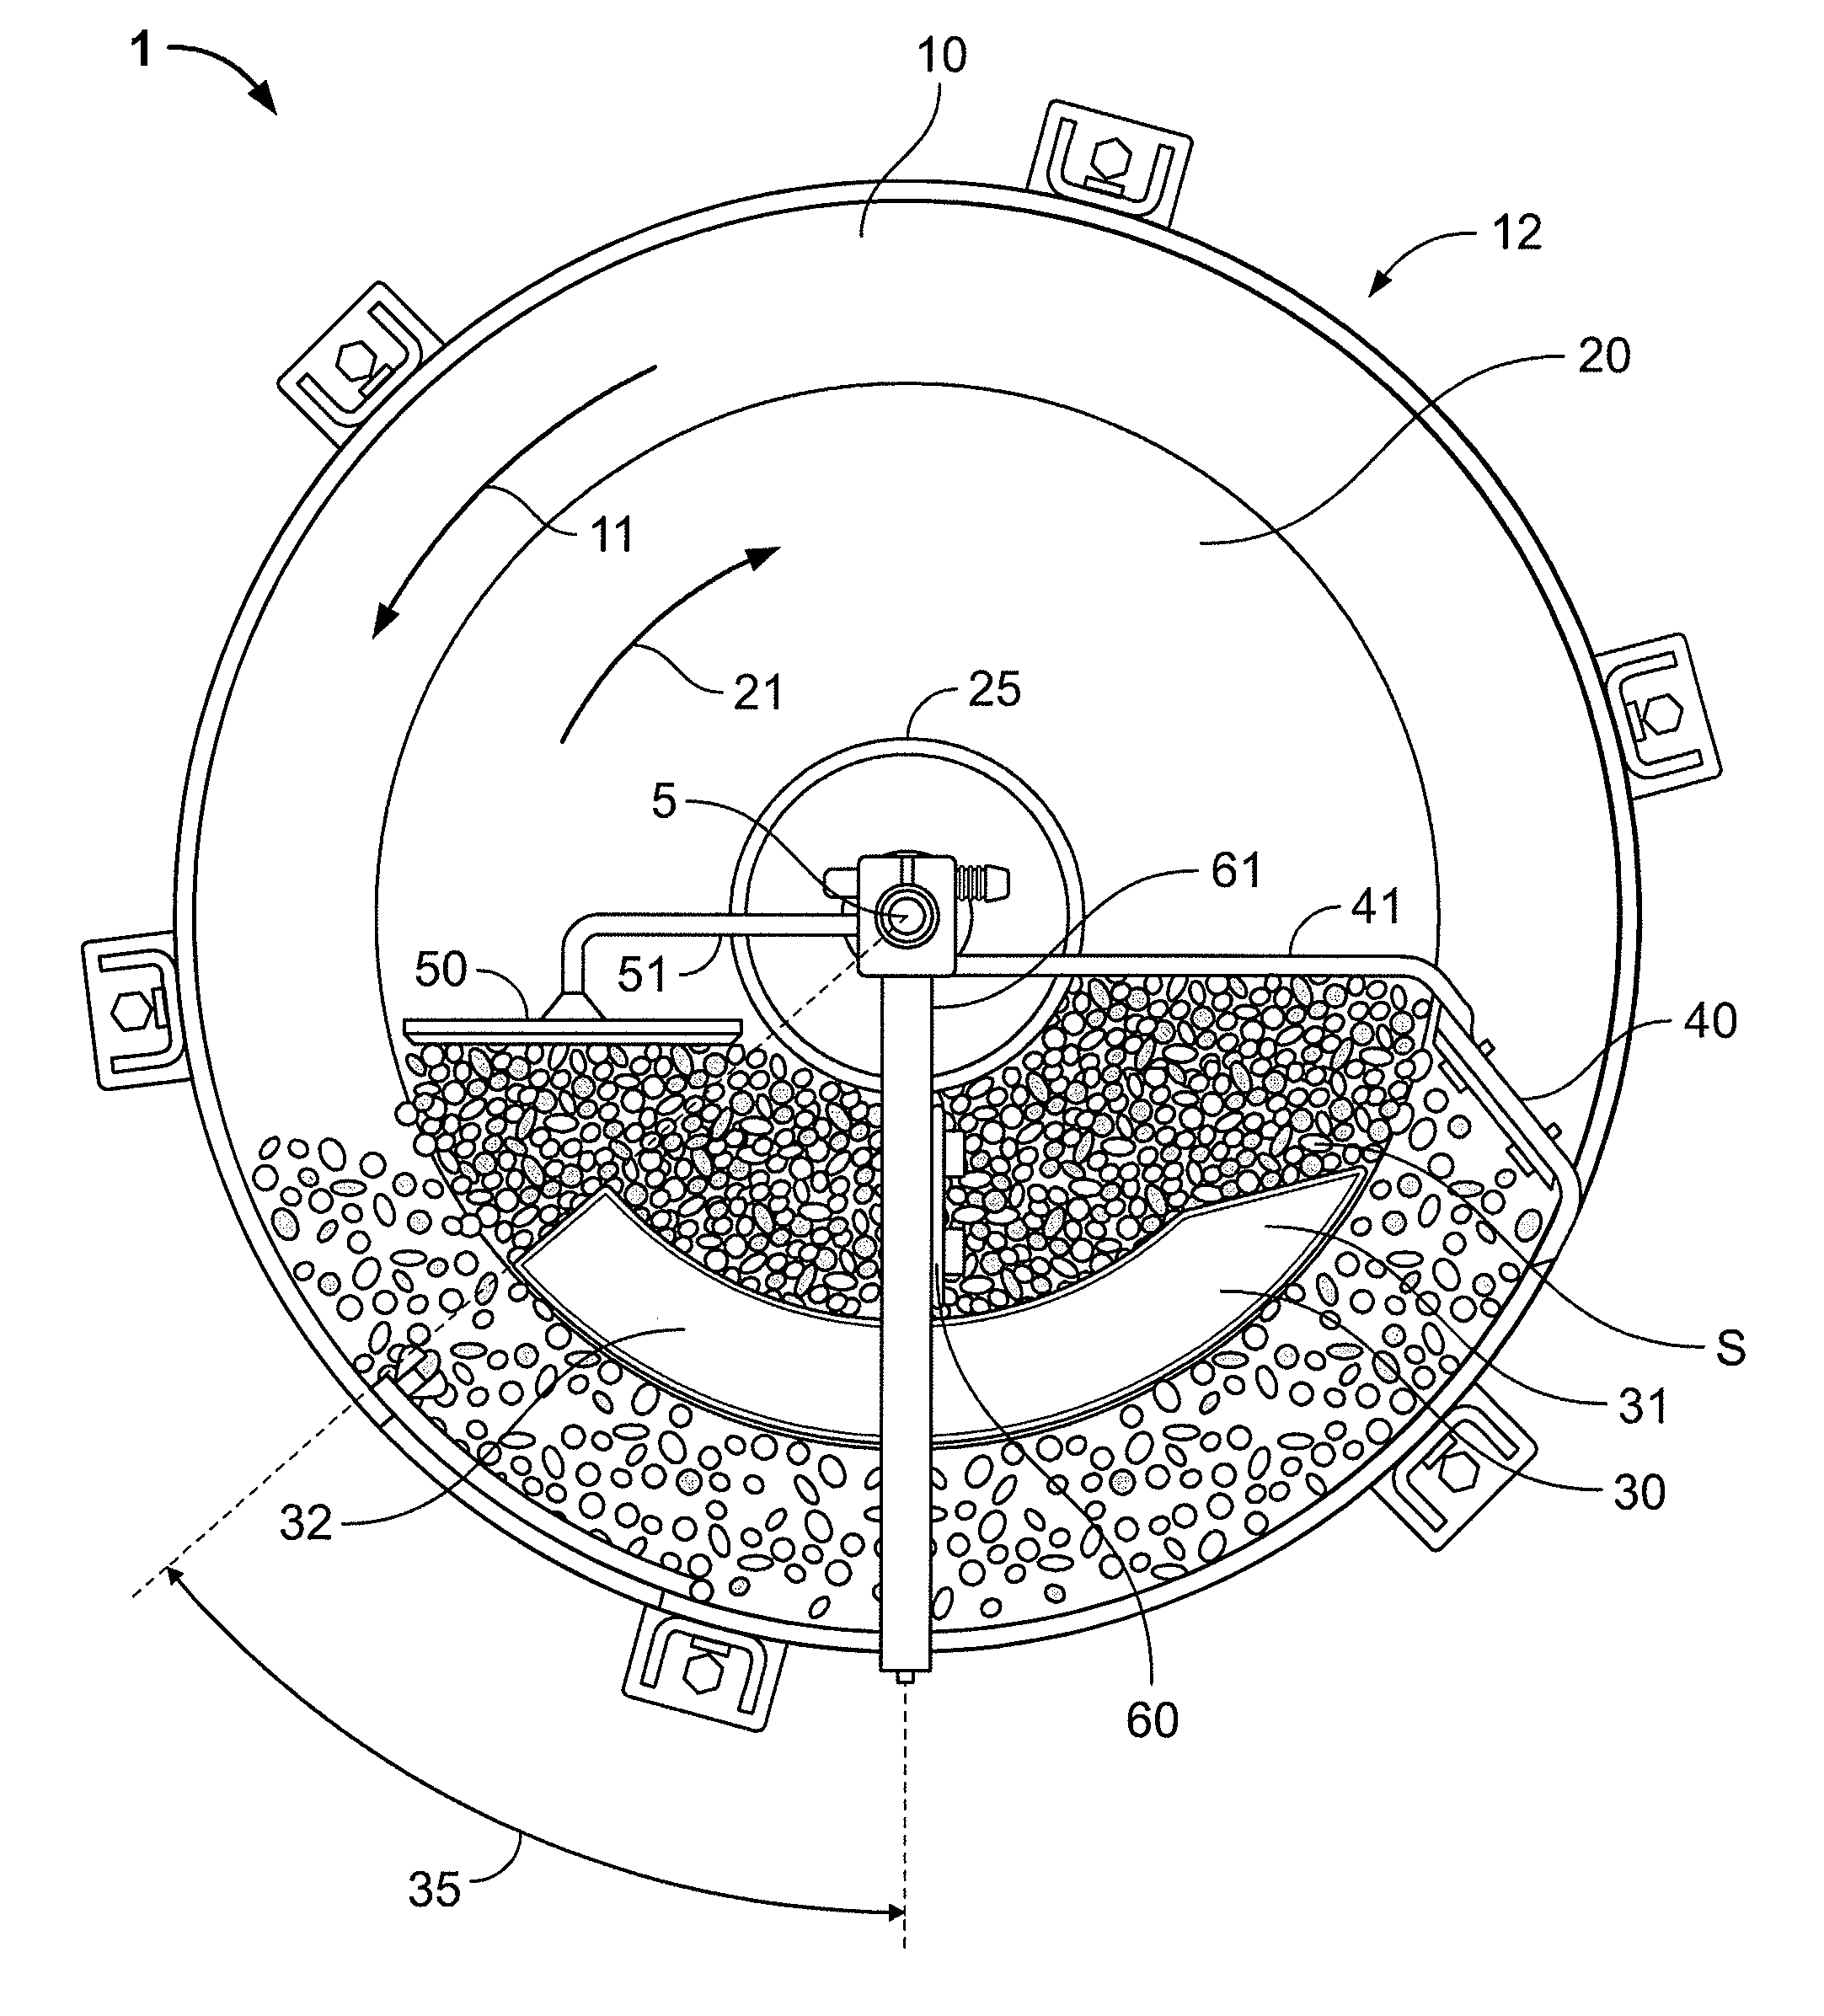 Apparatus and method for presenting a particulate sample to the scanning field of a sensor device